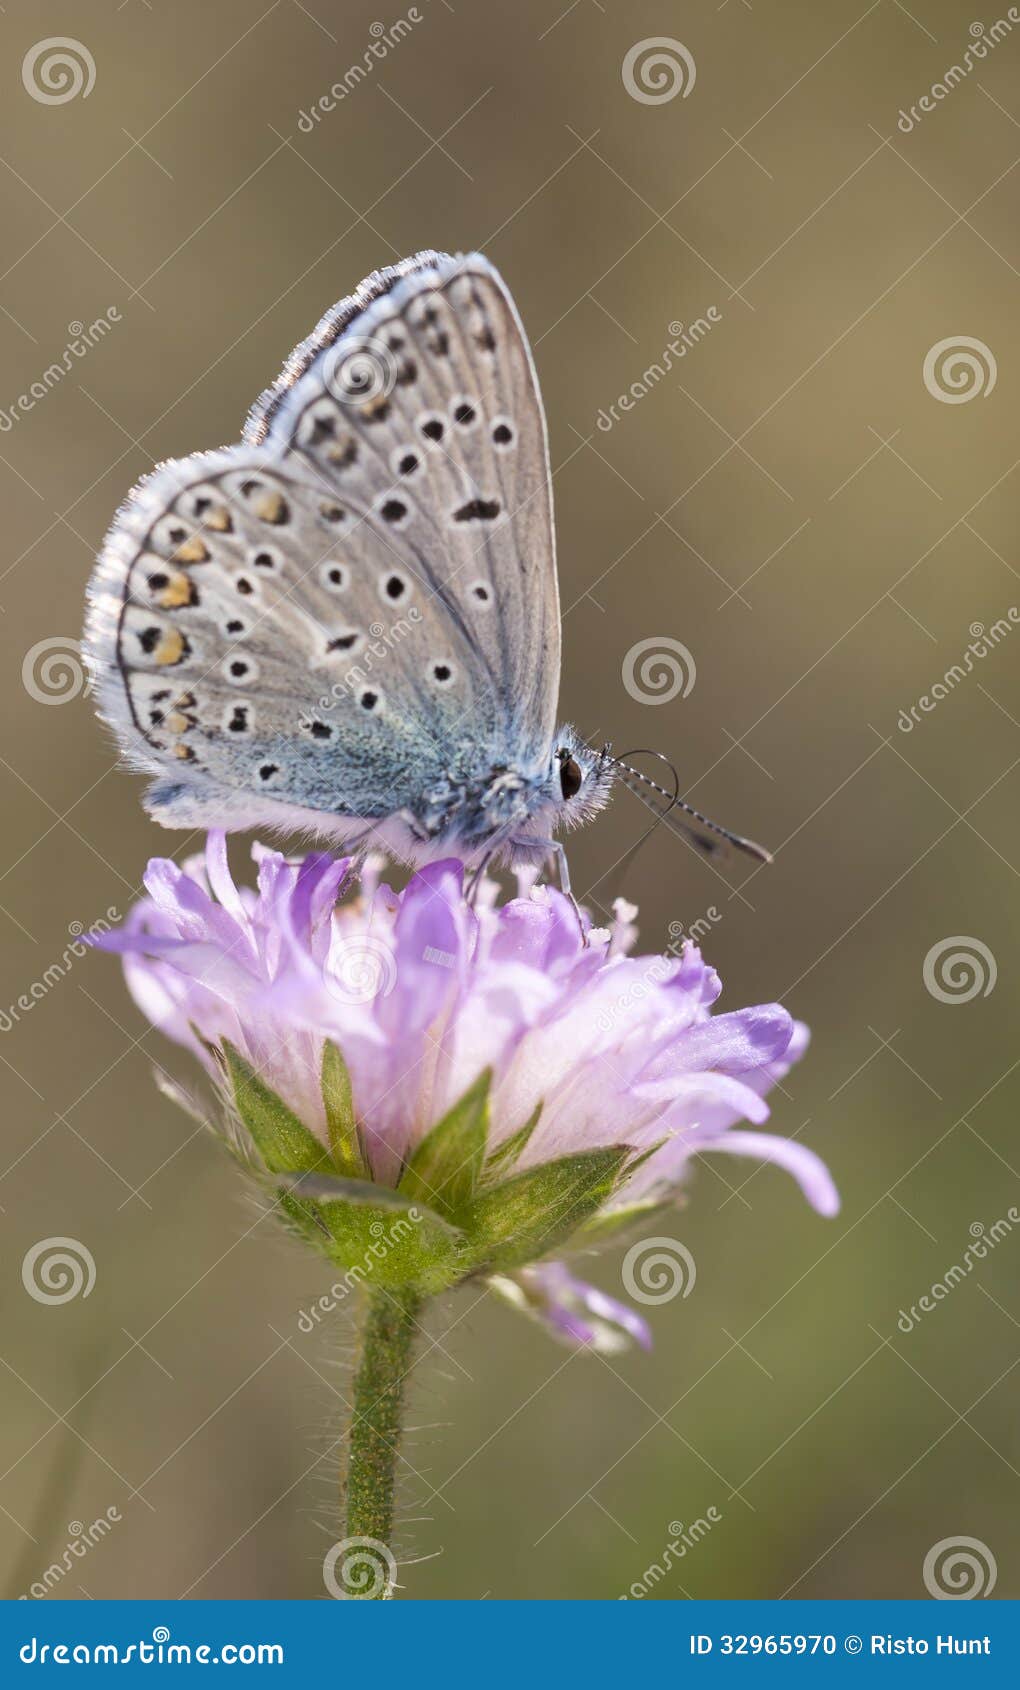 small blueish butterfly on flower